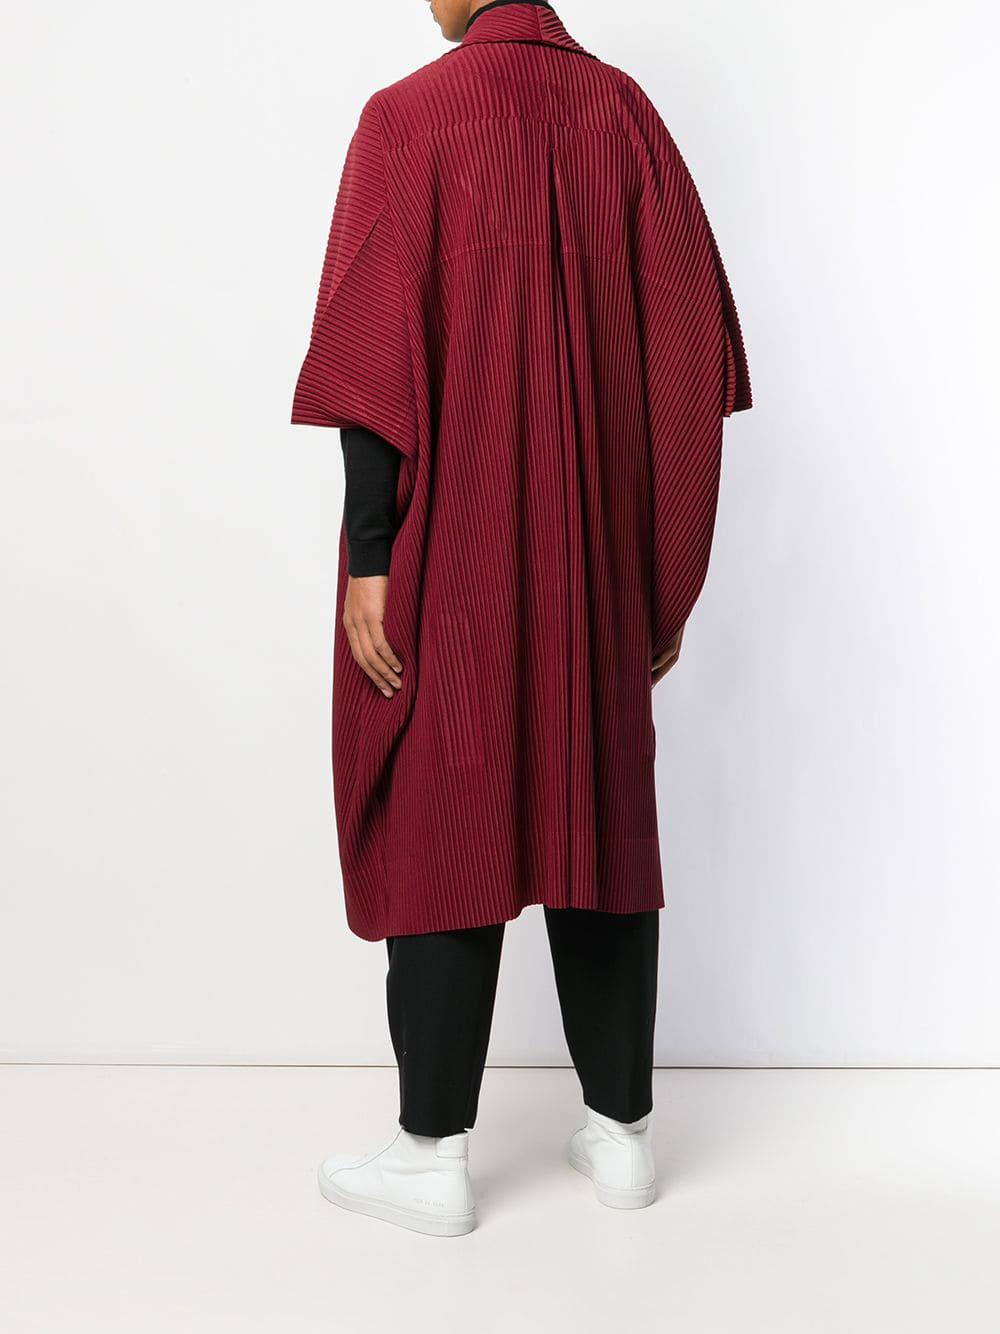 Homme Plissé Issey Miyake Pleated Long Kimono in Red for Men - Lyst